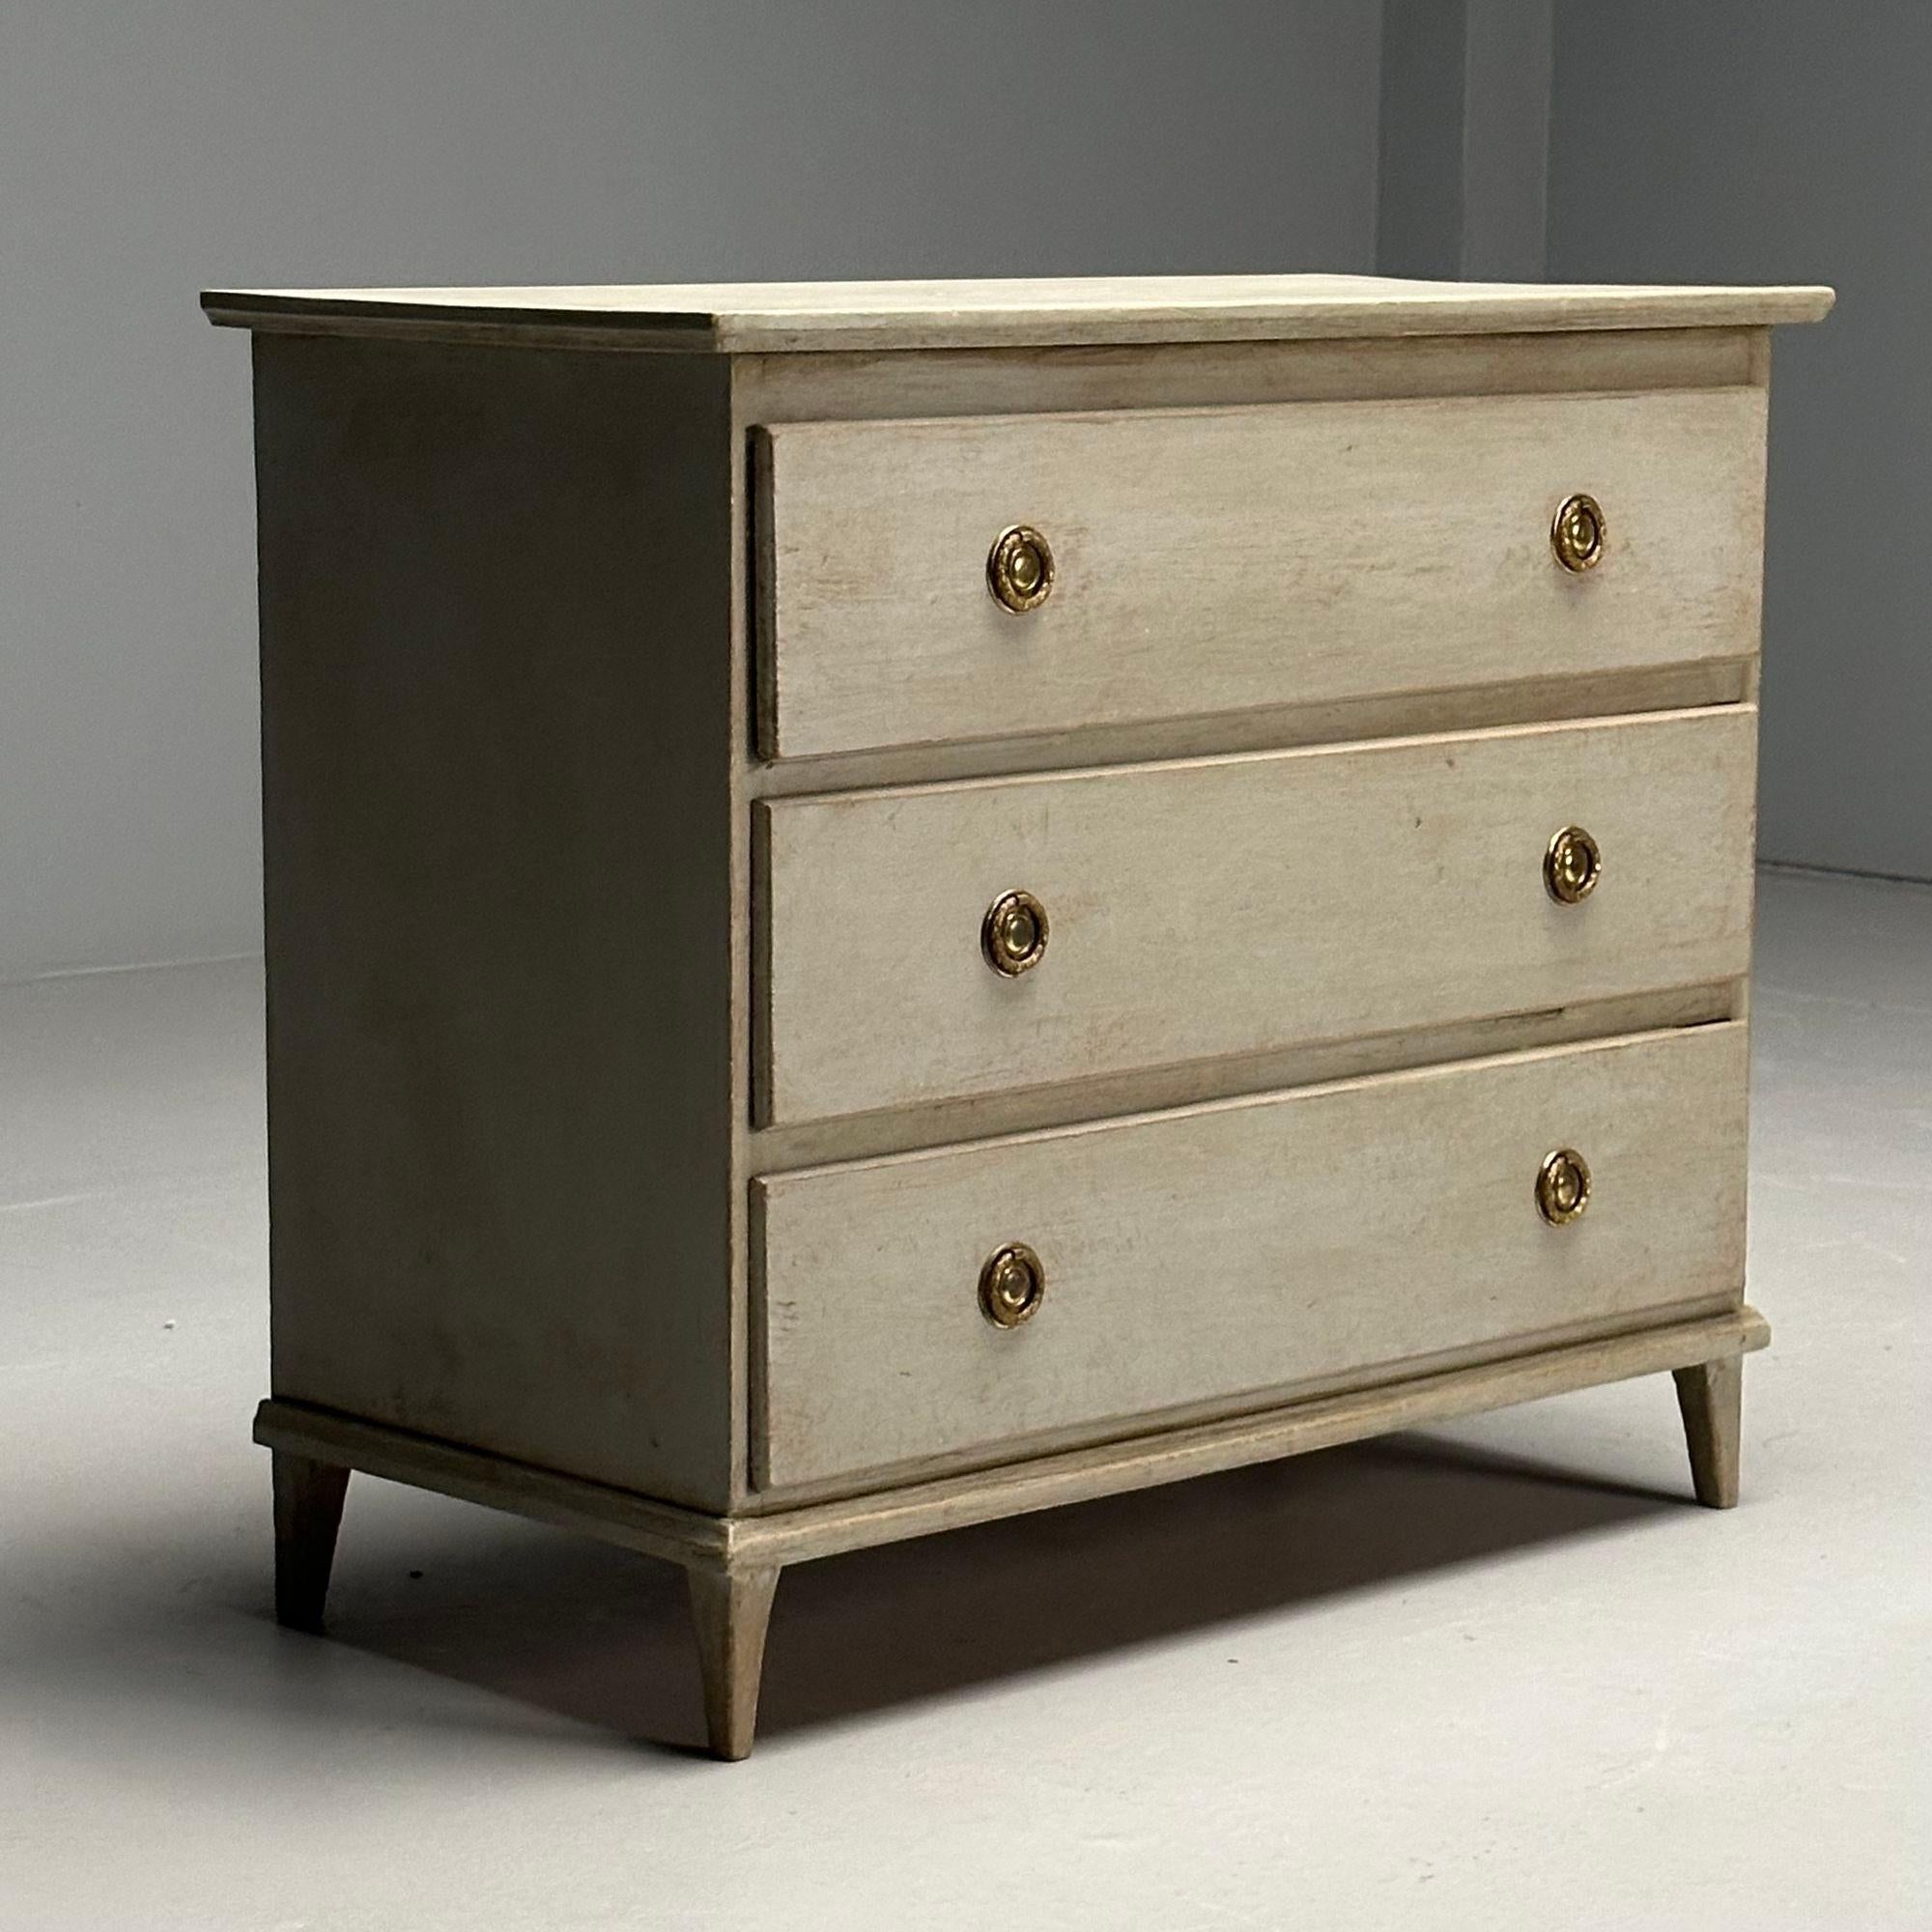 Gustavian, Swedish Commode or Dresser, Grey Paint Distressed, Brass, Sweden, 1940s

Gustavian chest of drawers designed and produced in Sweden circa 1940s. This example features a gray paint distressed finish and three dovetailed drawers with brass